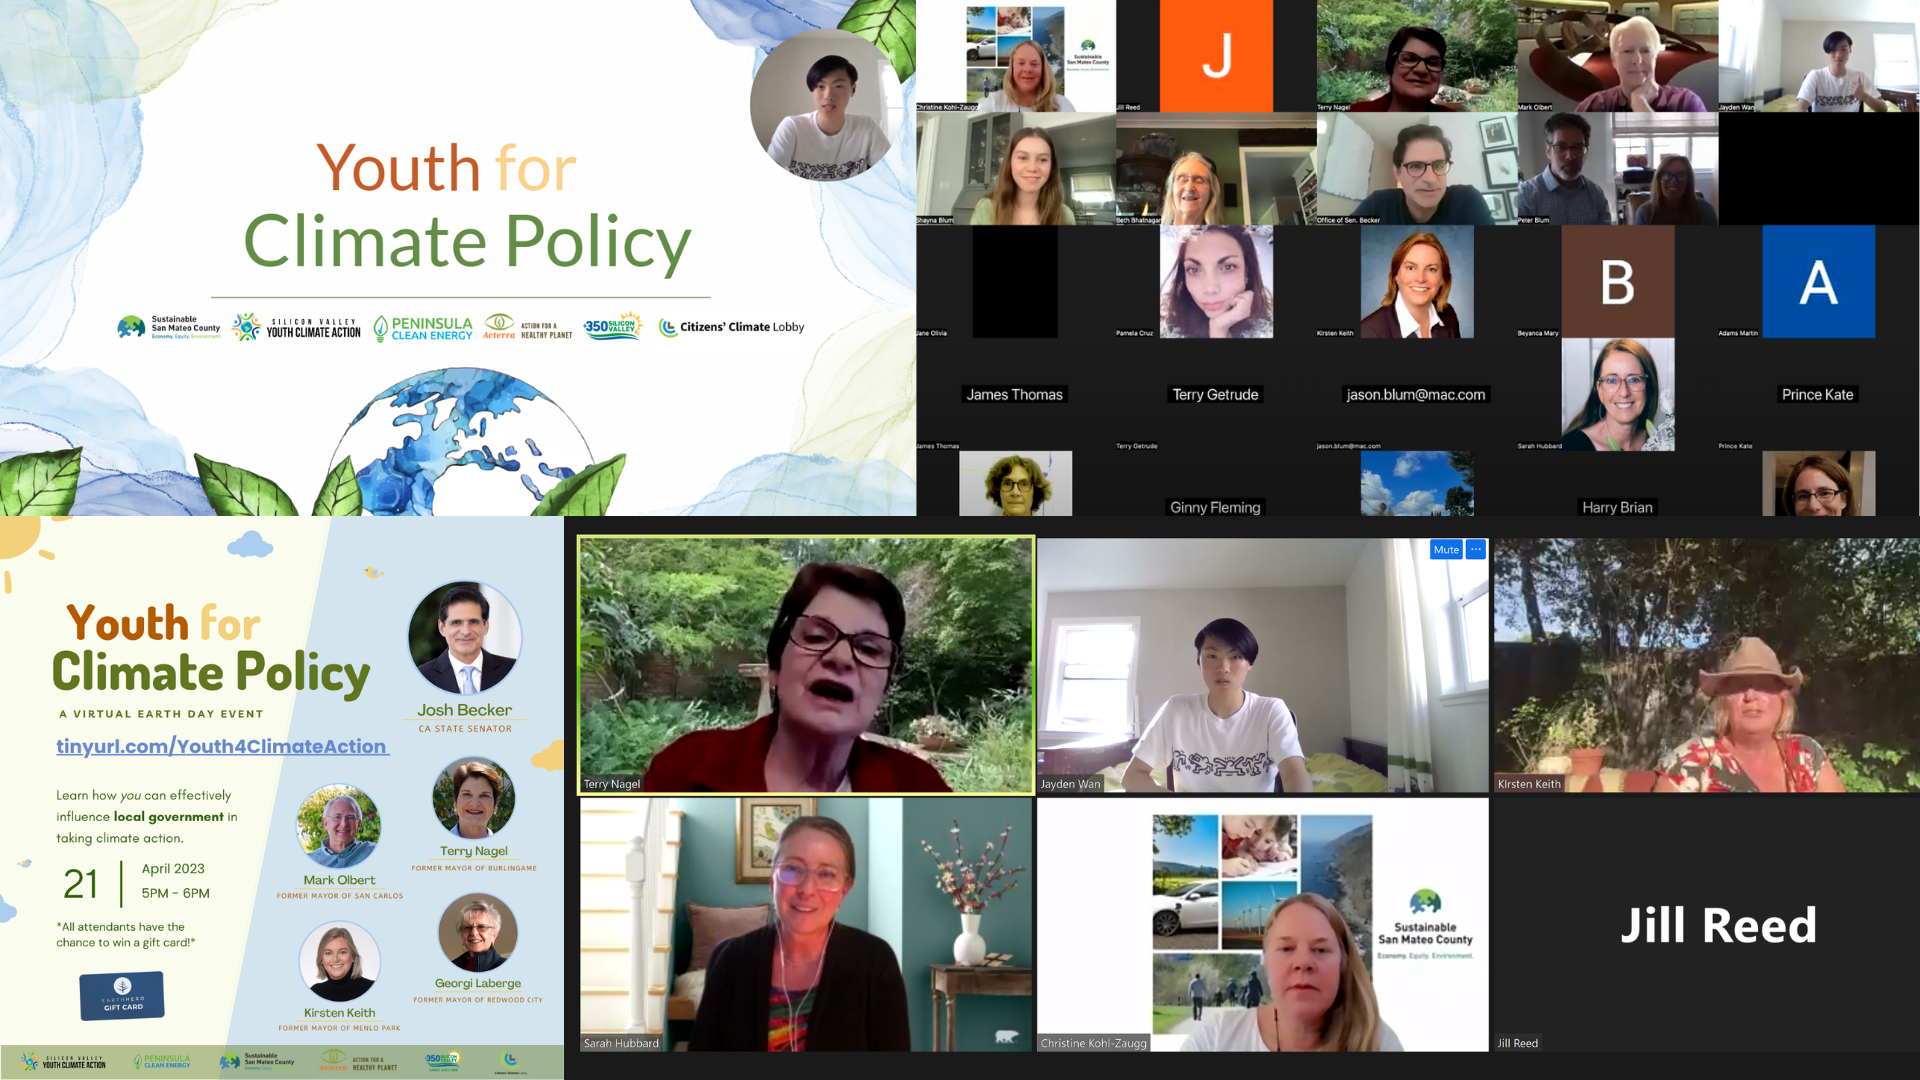 "Youth for Climate Policy"